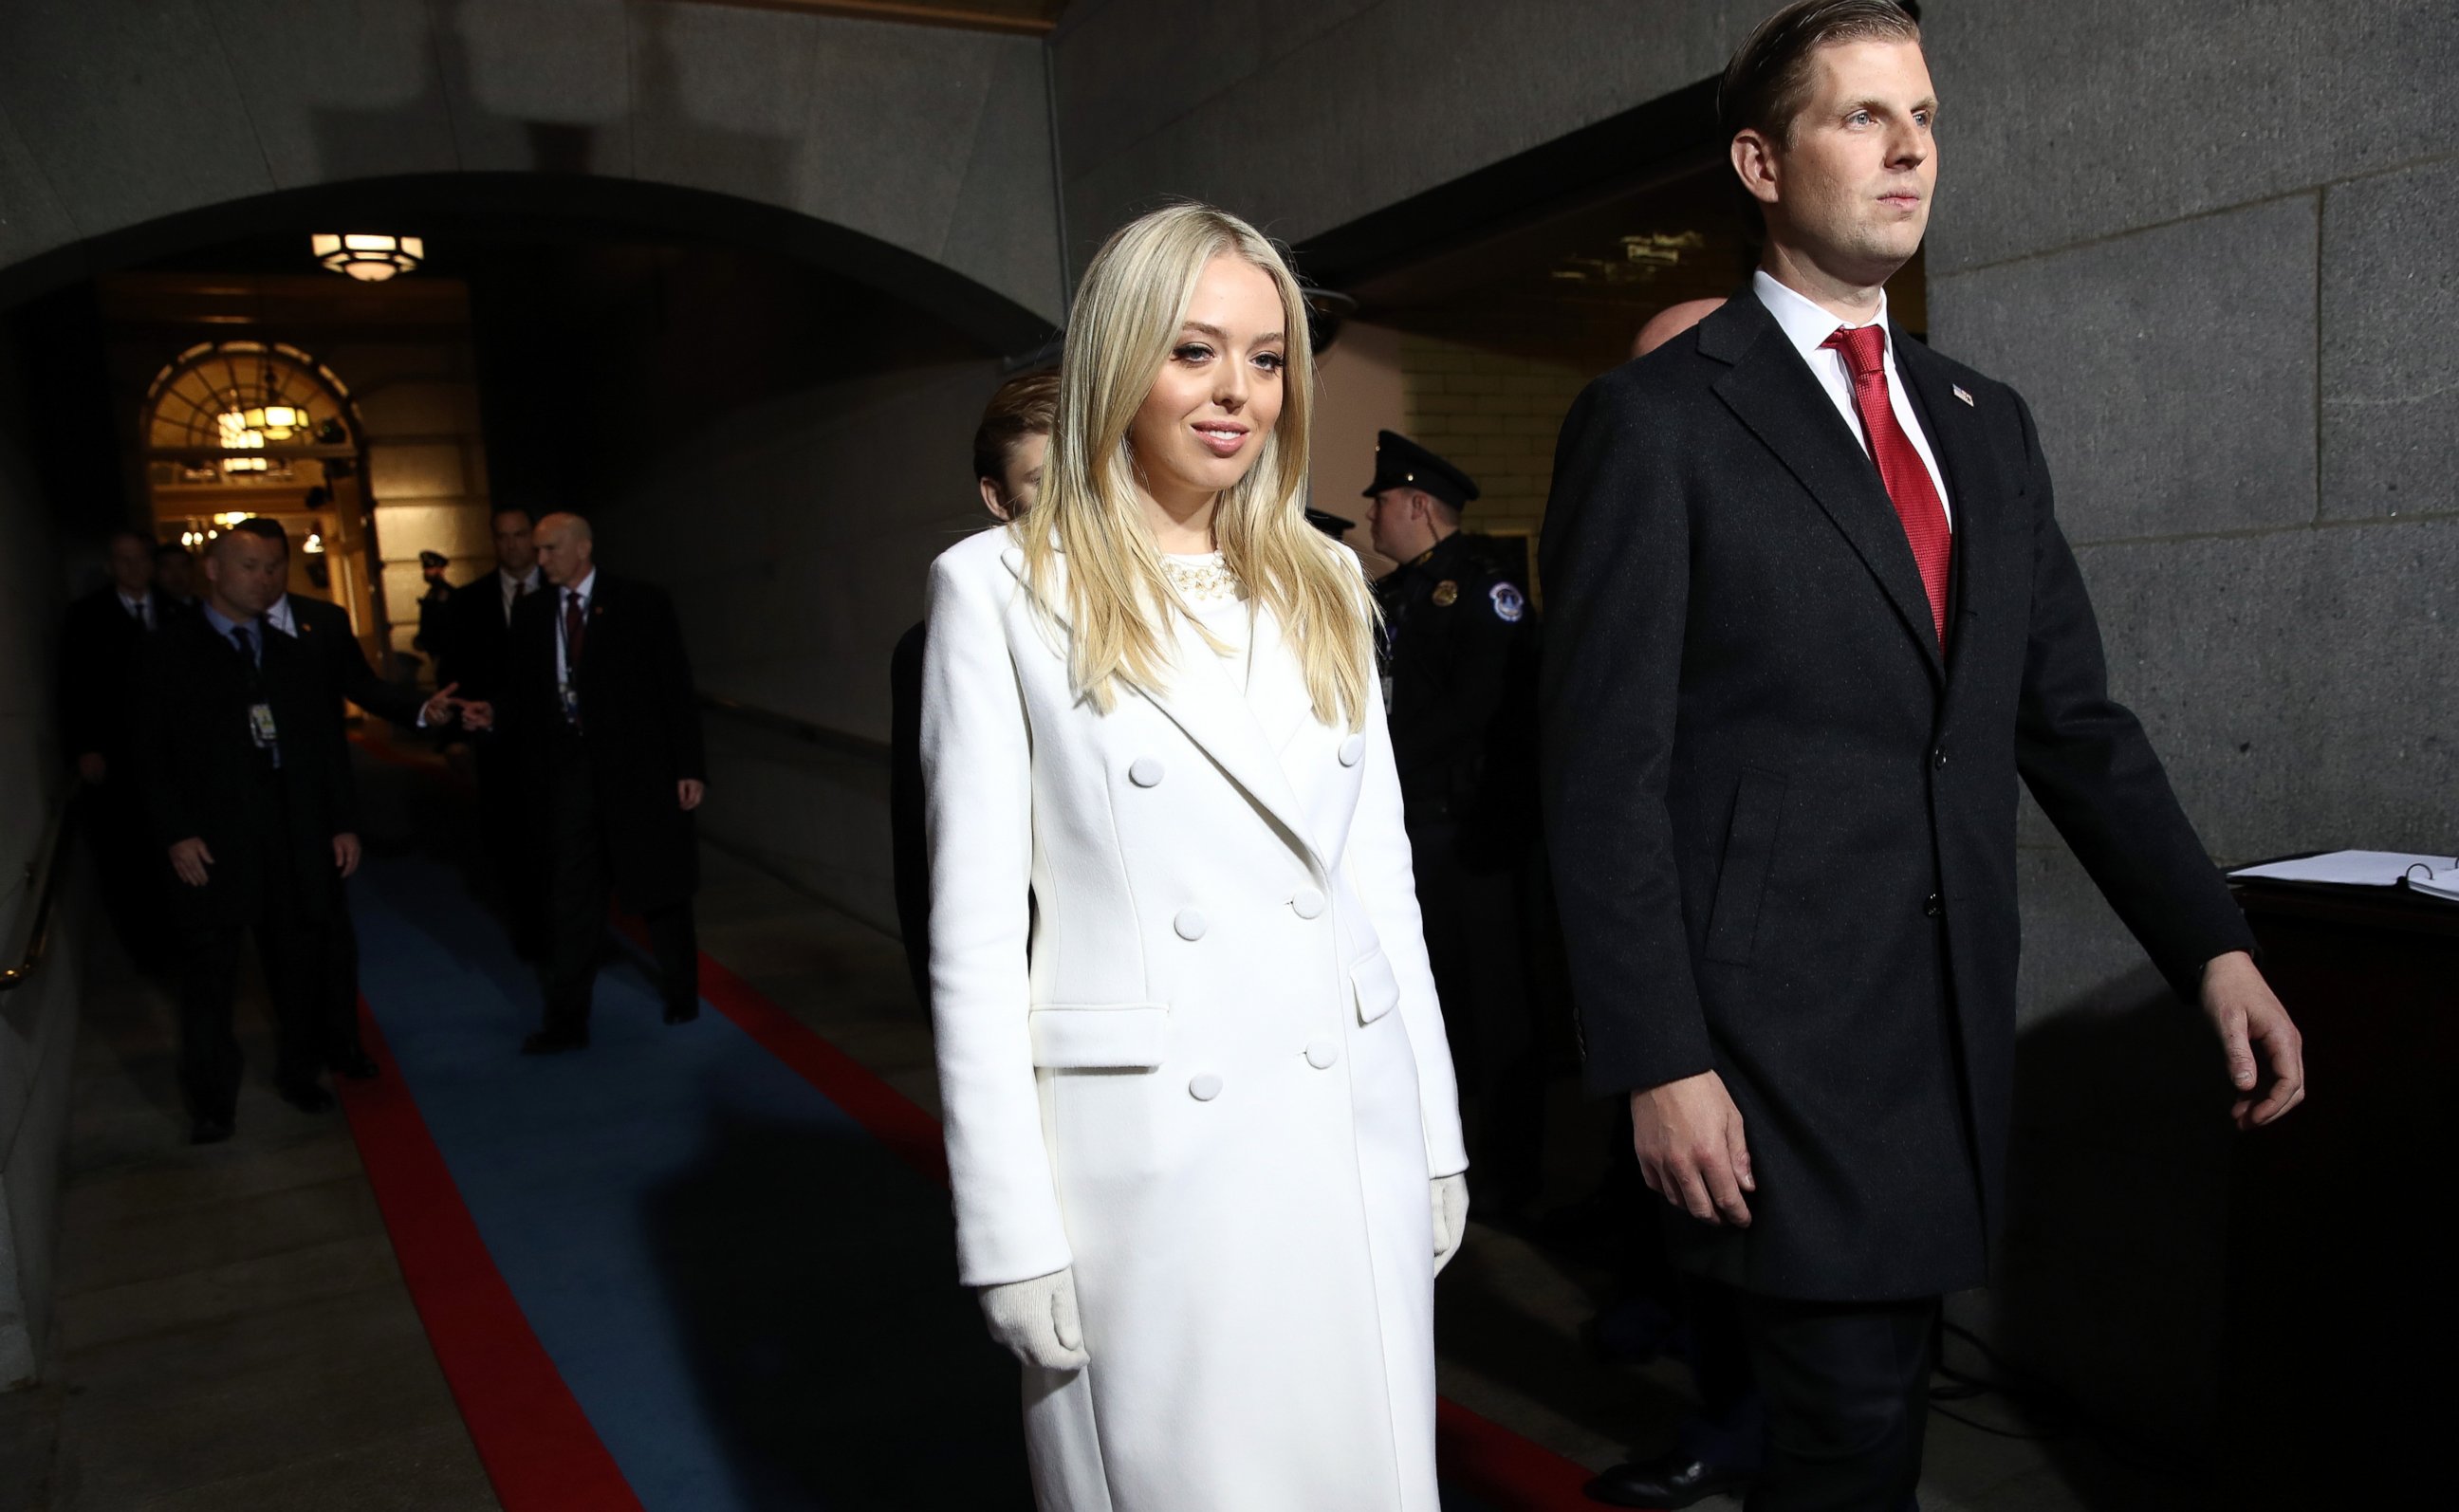 PHOTO: Eric Trump and Tiffany Trump arrive on the West Front of the U.S. Capitol on January 20, 2017 in Washington, DC. In today's inauguration ceremony Donald J. Trump becomes the 45th president of the United States.